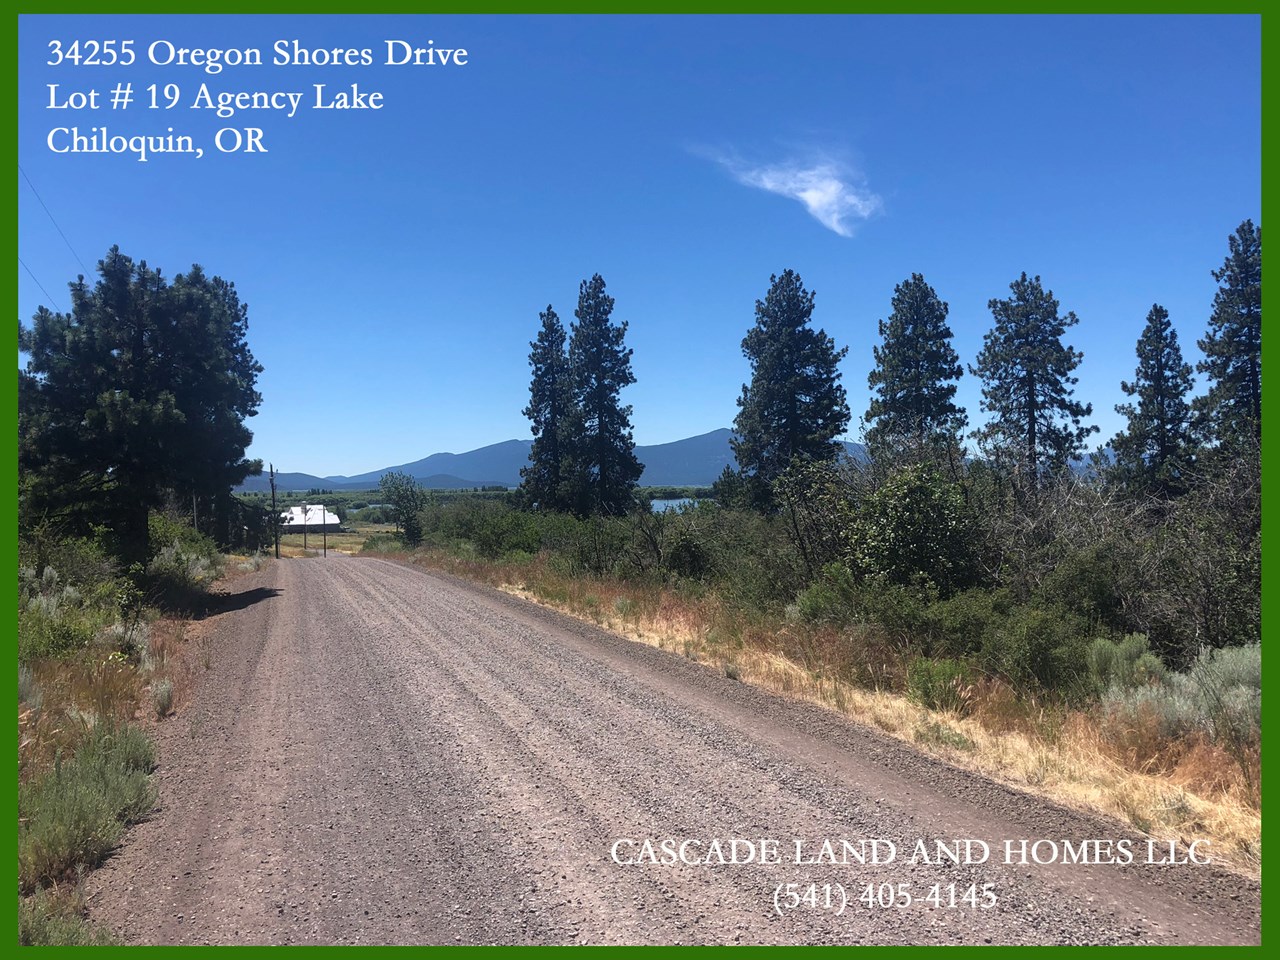 very well groomed and maintained packed gravel roads to the property. it was very easy to access this property. it is so close to the main road and the lake shore! we had no trouble at all getting here. the roads to the subdivision are paved, and gravel within the subdivision for easy access.